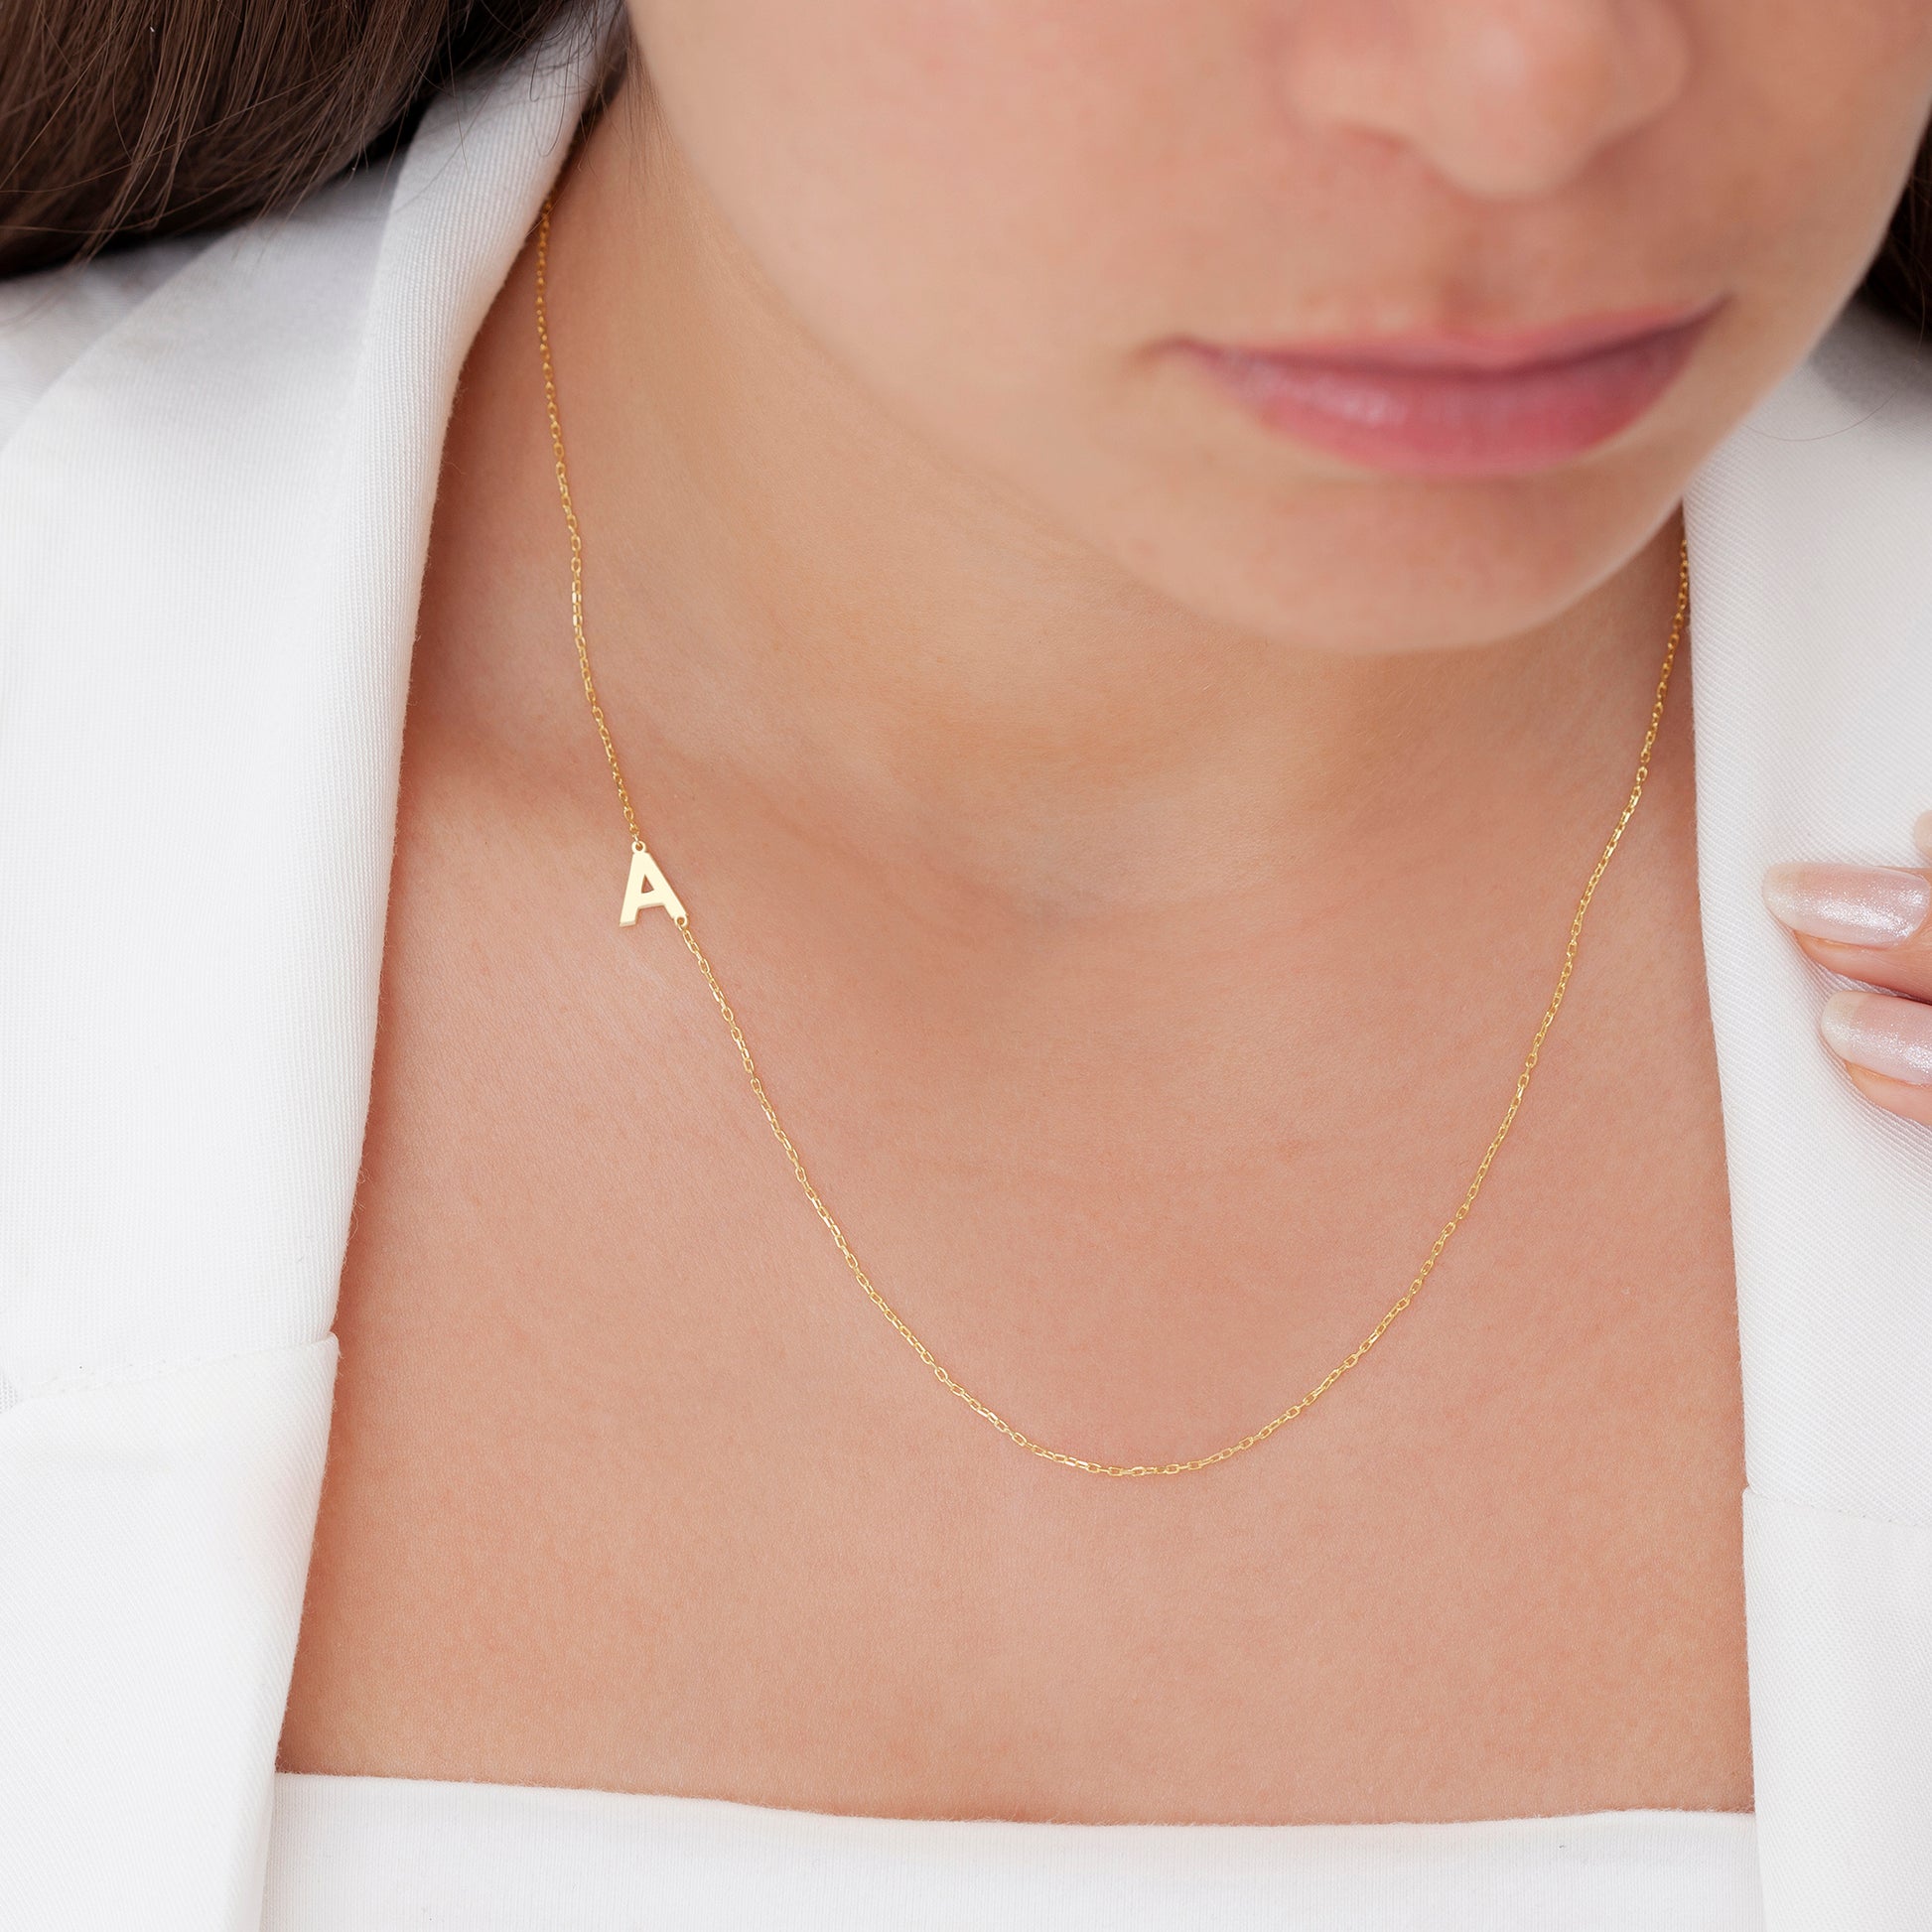 Sideway Initial Necklace 